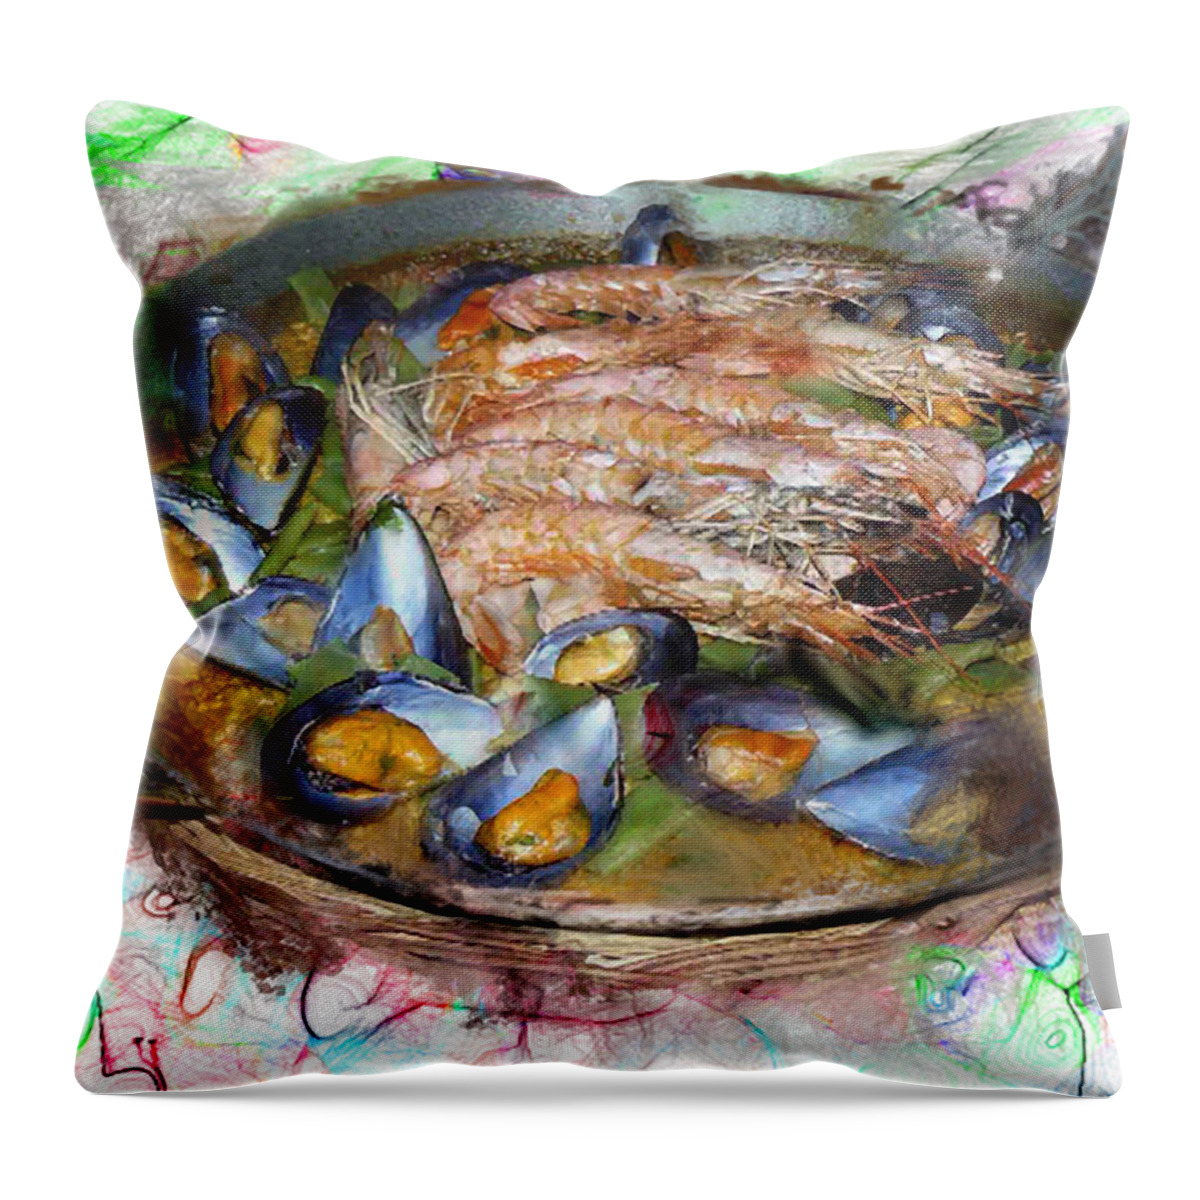 Paella Throw Pillow featuring the photograph Savory Seafood Paella by Dee Flouton